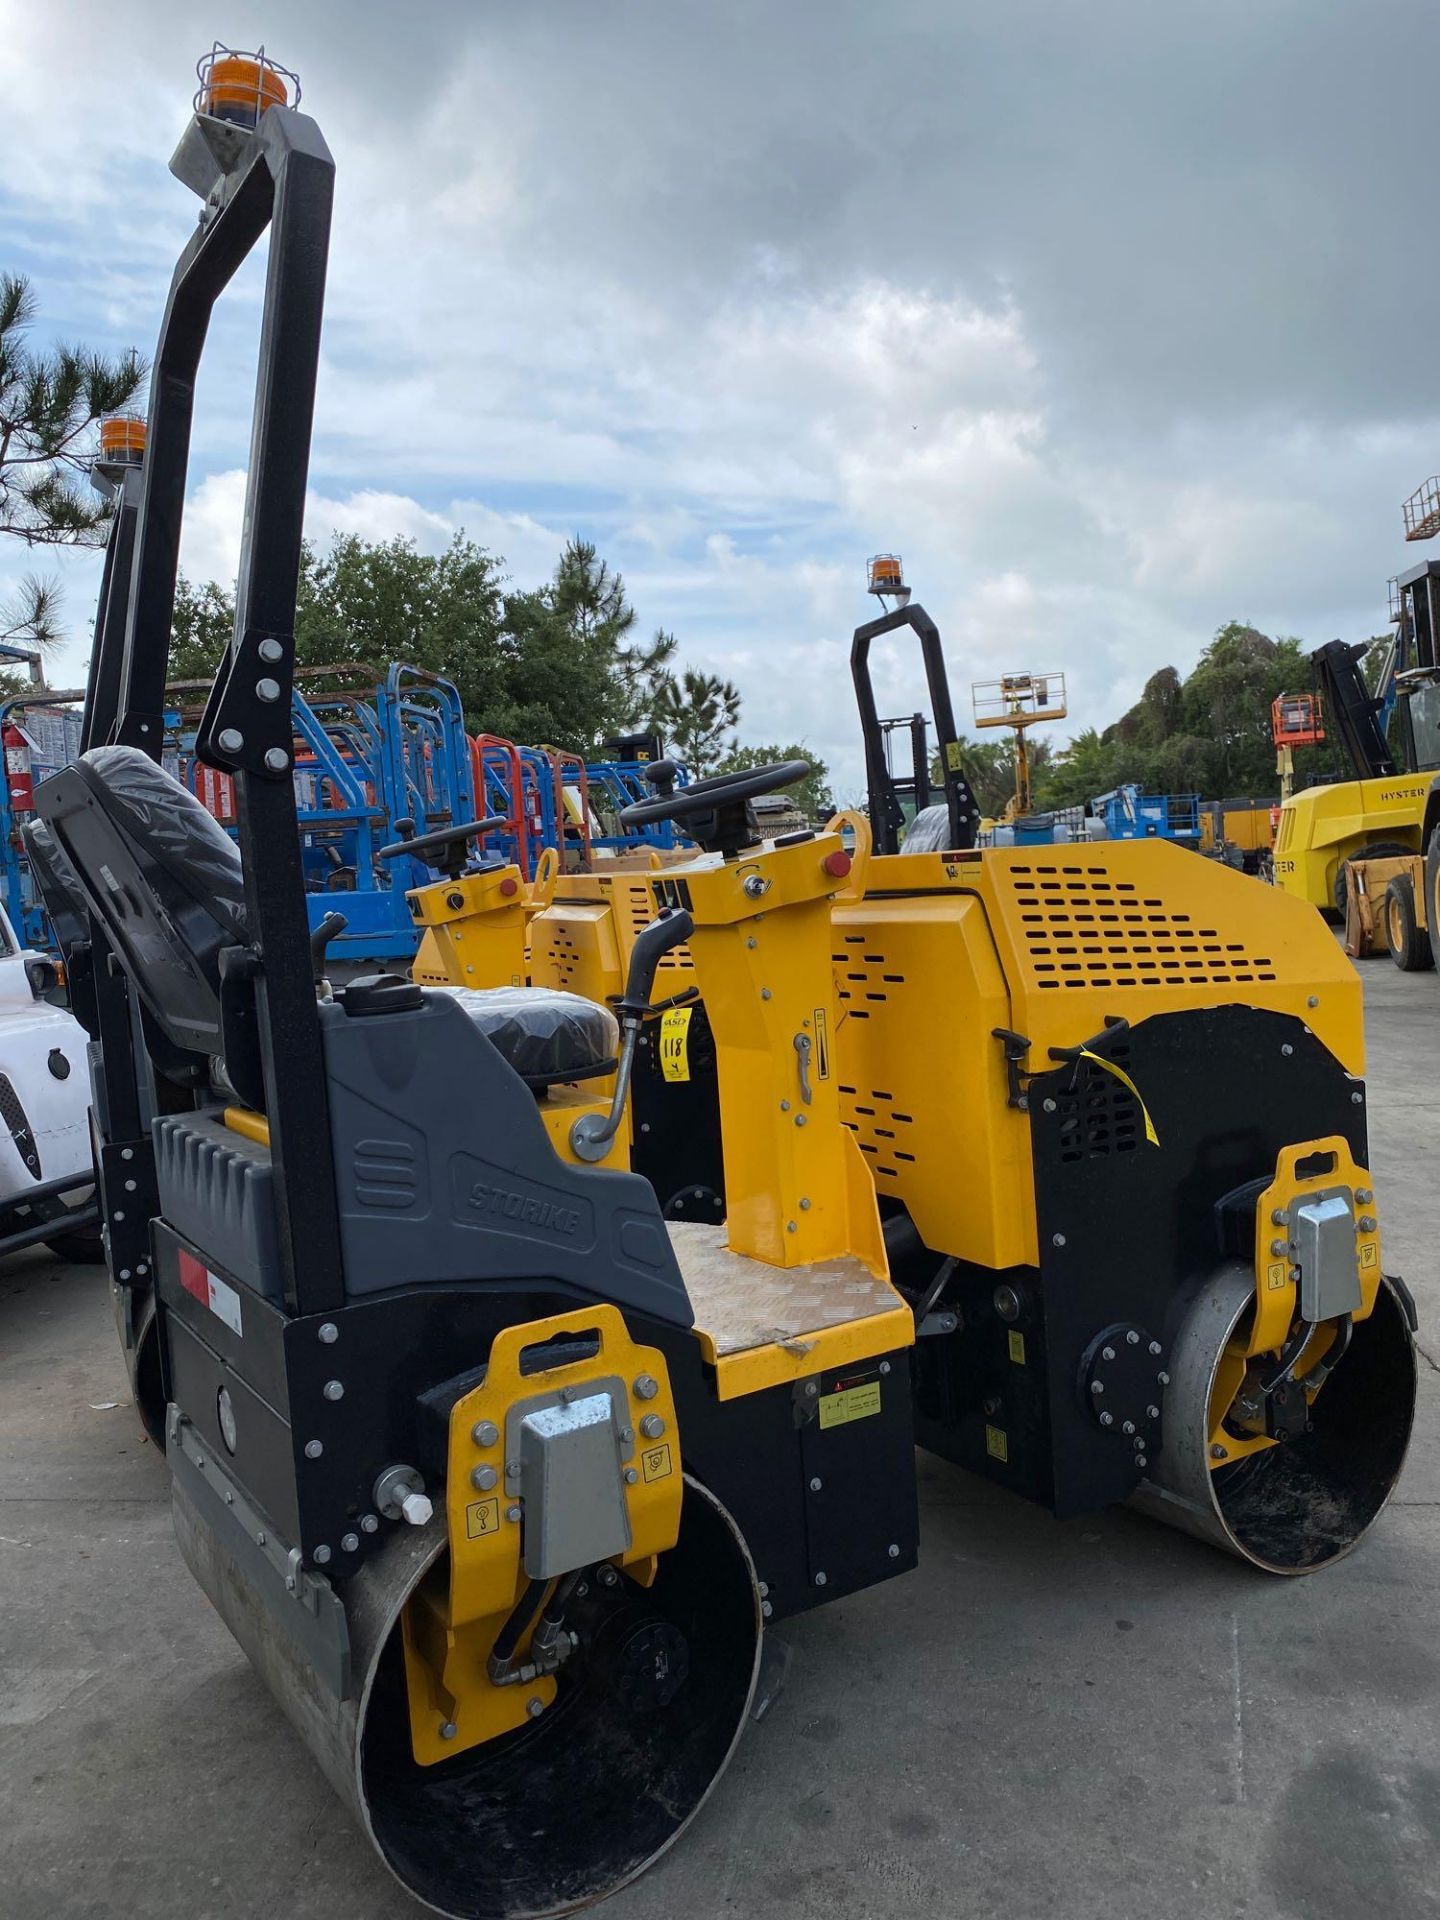 2019 STORIKE VIBRATORY ROLLER MODEL ST1200, DOUBLE DRUM, ELECTRIC START, WATER SYSTEM, 13.5 HP, RUNS - Image 5 of 7